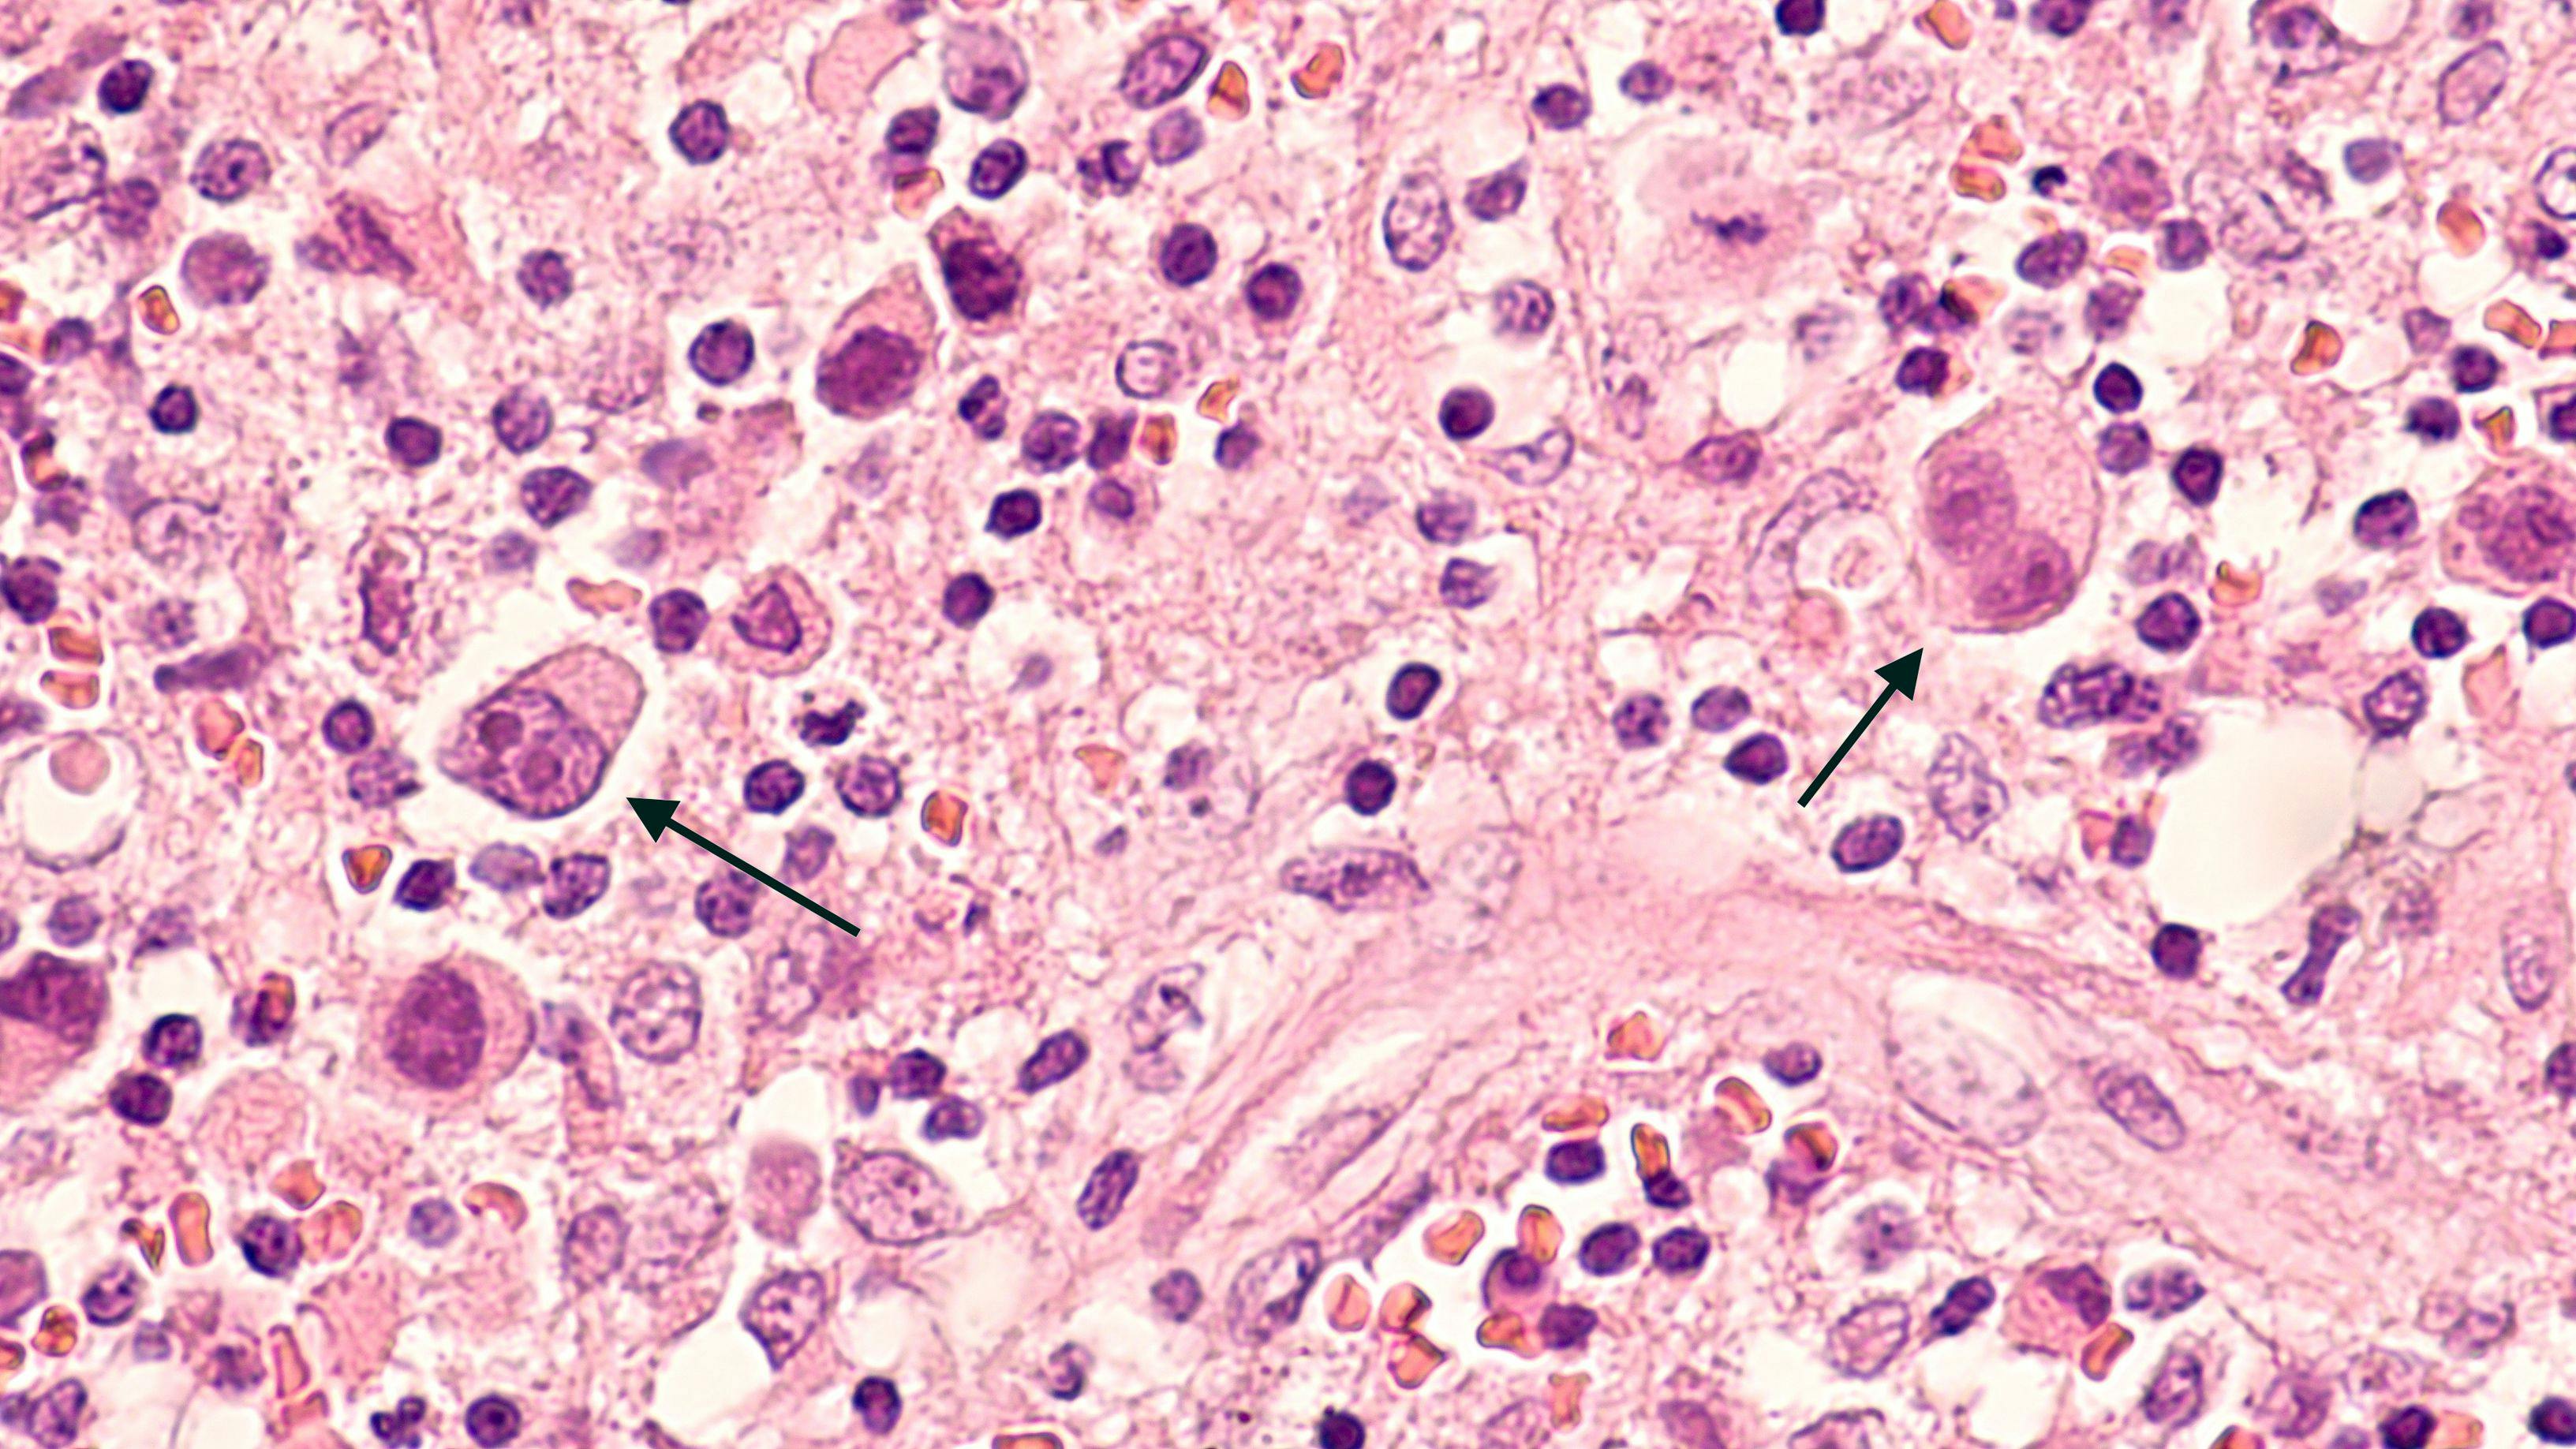 Microscopic image of a lymph node in a patient with Hodgkin's Disease (lymphoma), showing two Reed Sternberg cells in the same field.  | Image Credit: © David A Litman -www.stock.adobe.com